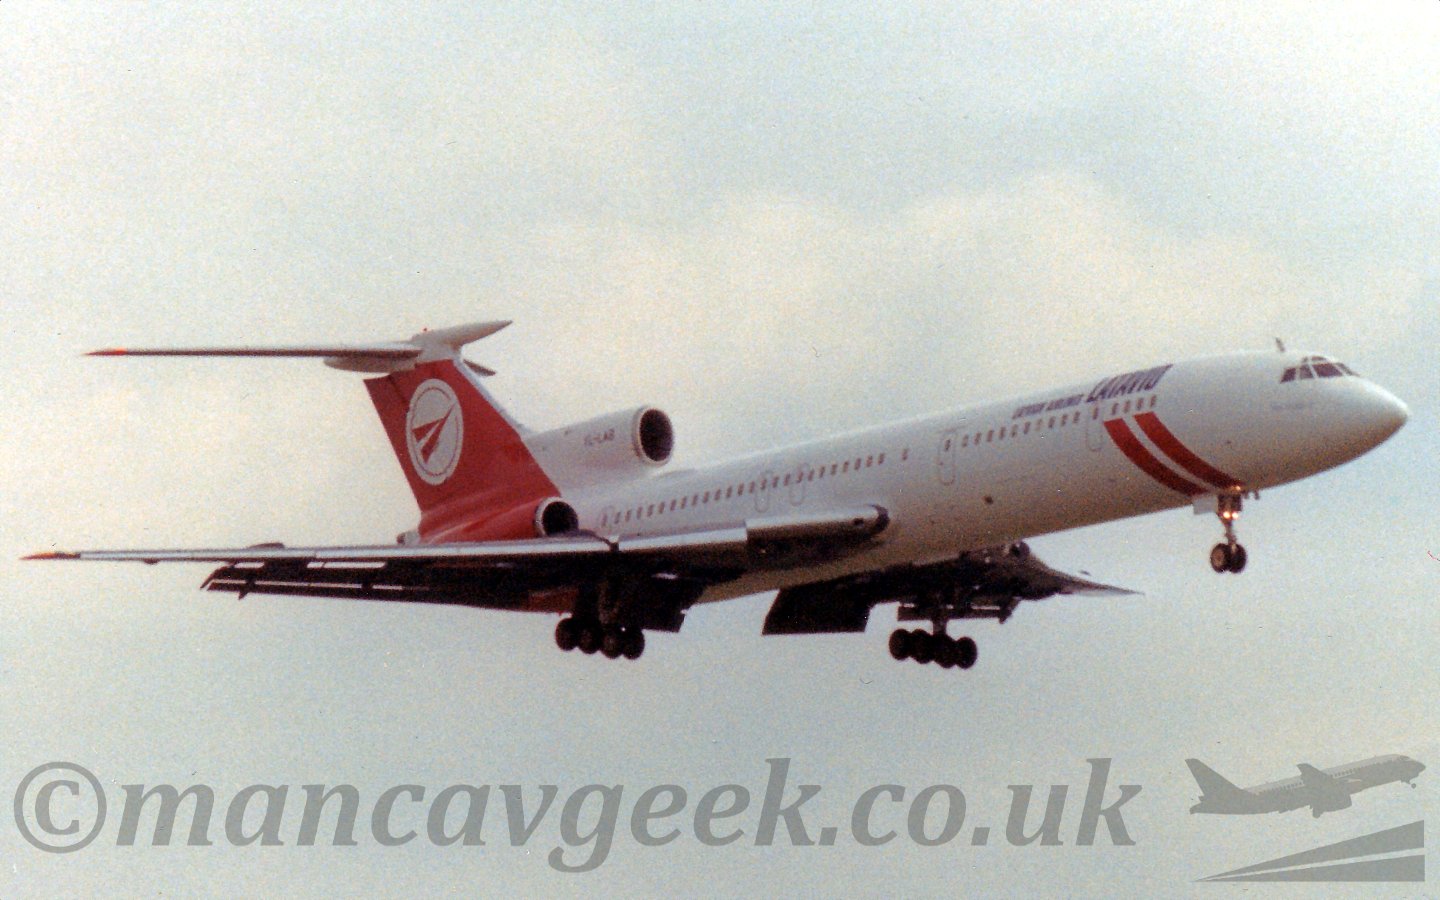 Side view of a white and red, 3 engined jet airliner flying from left to right at a low altitude, with undercarriage lowered and flaps deployed from the rear of the wings, suggesting it is just about to land.